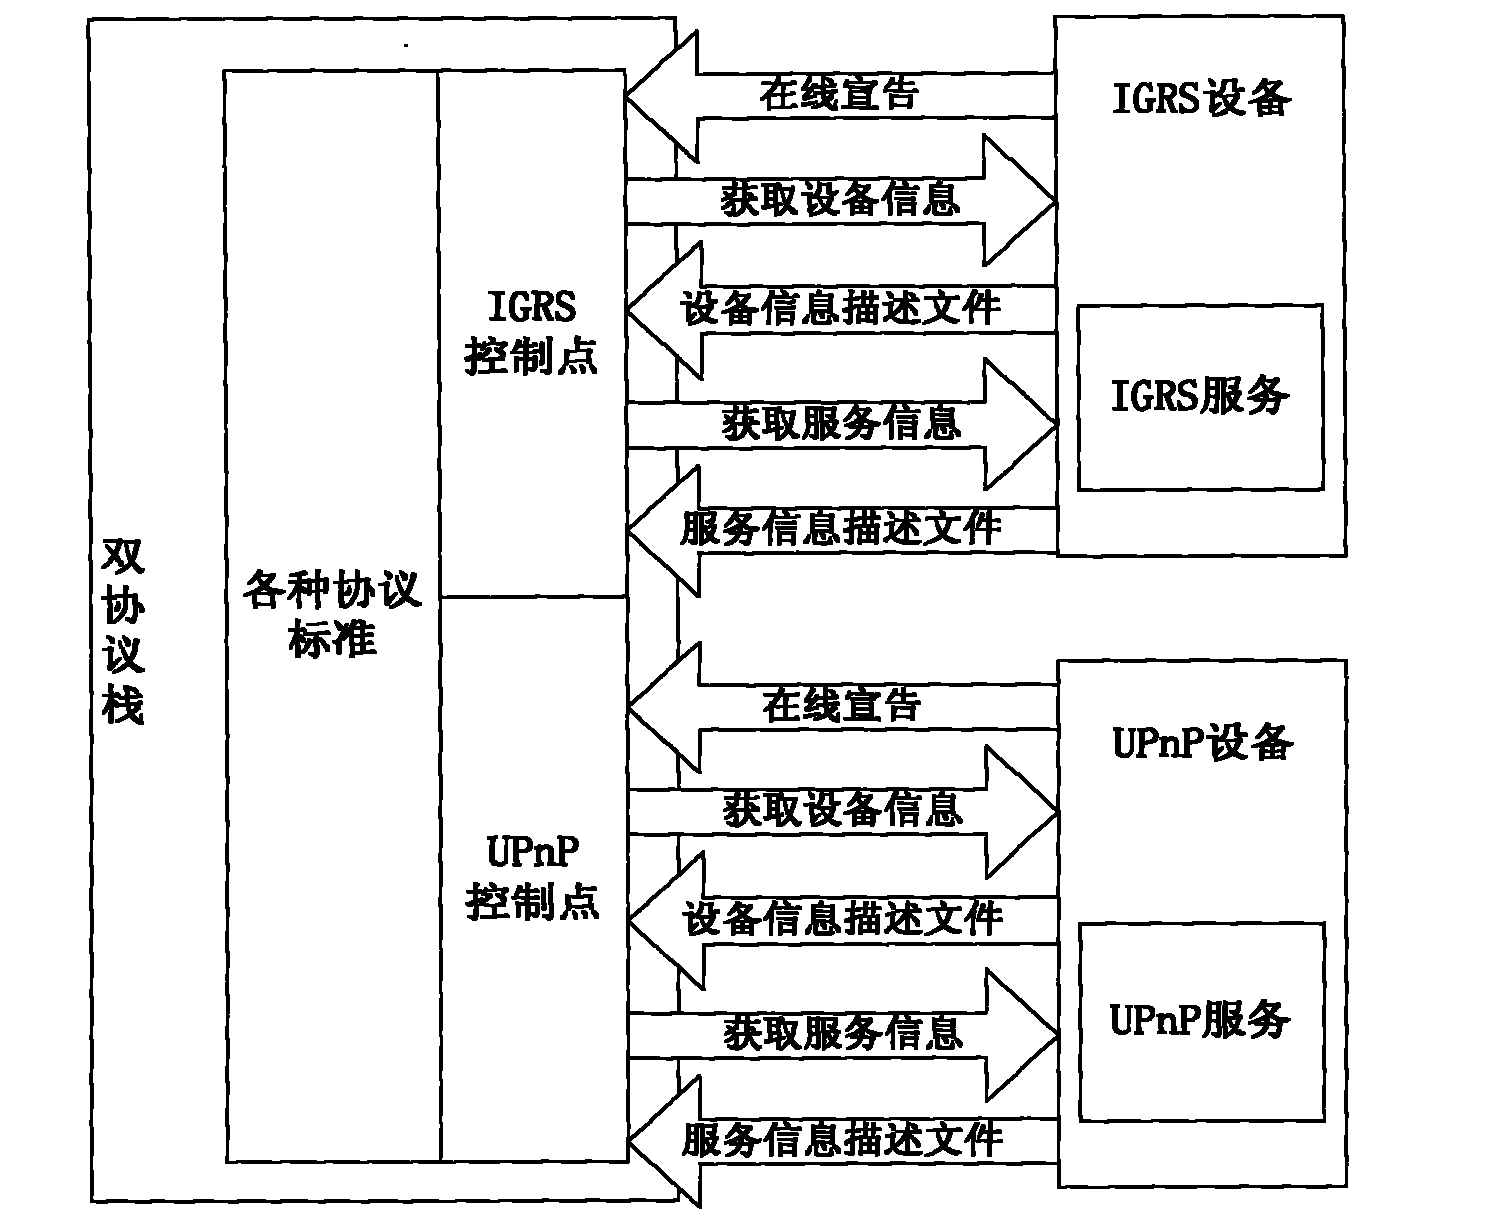 UPnP and IGRS protocol conversion system and method based on virtual equipment